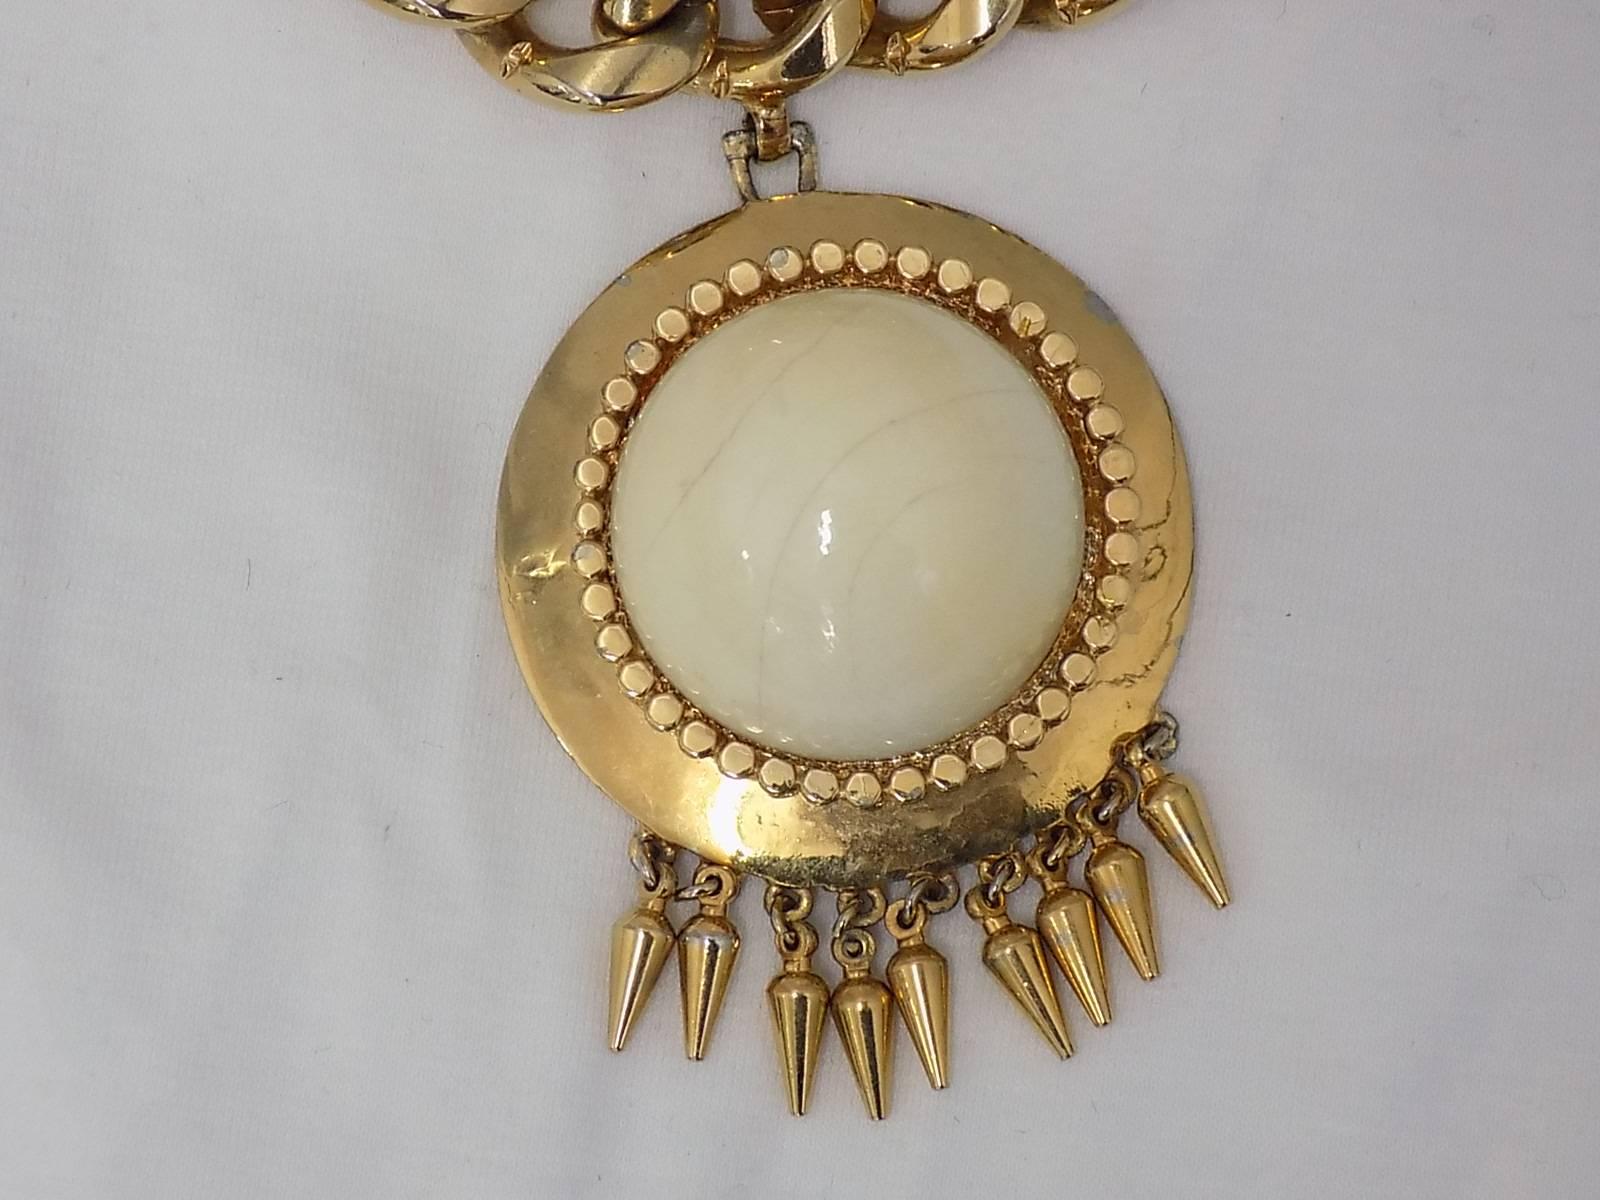 Nettie Rosentien large dome pendant choker necklace beautiful gold tone signed vintage pristine condition heavy chain half inch links 16 inches long with a dome pendant 1/3inches in diameter and half inch hanging spears 